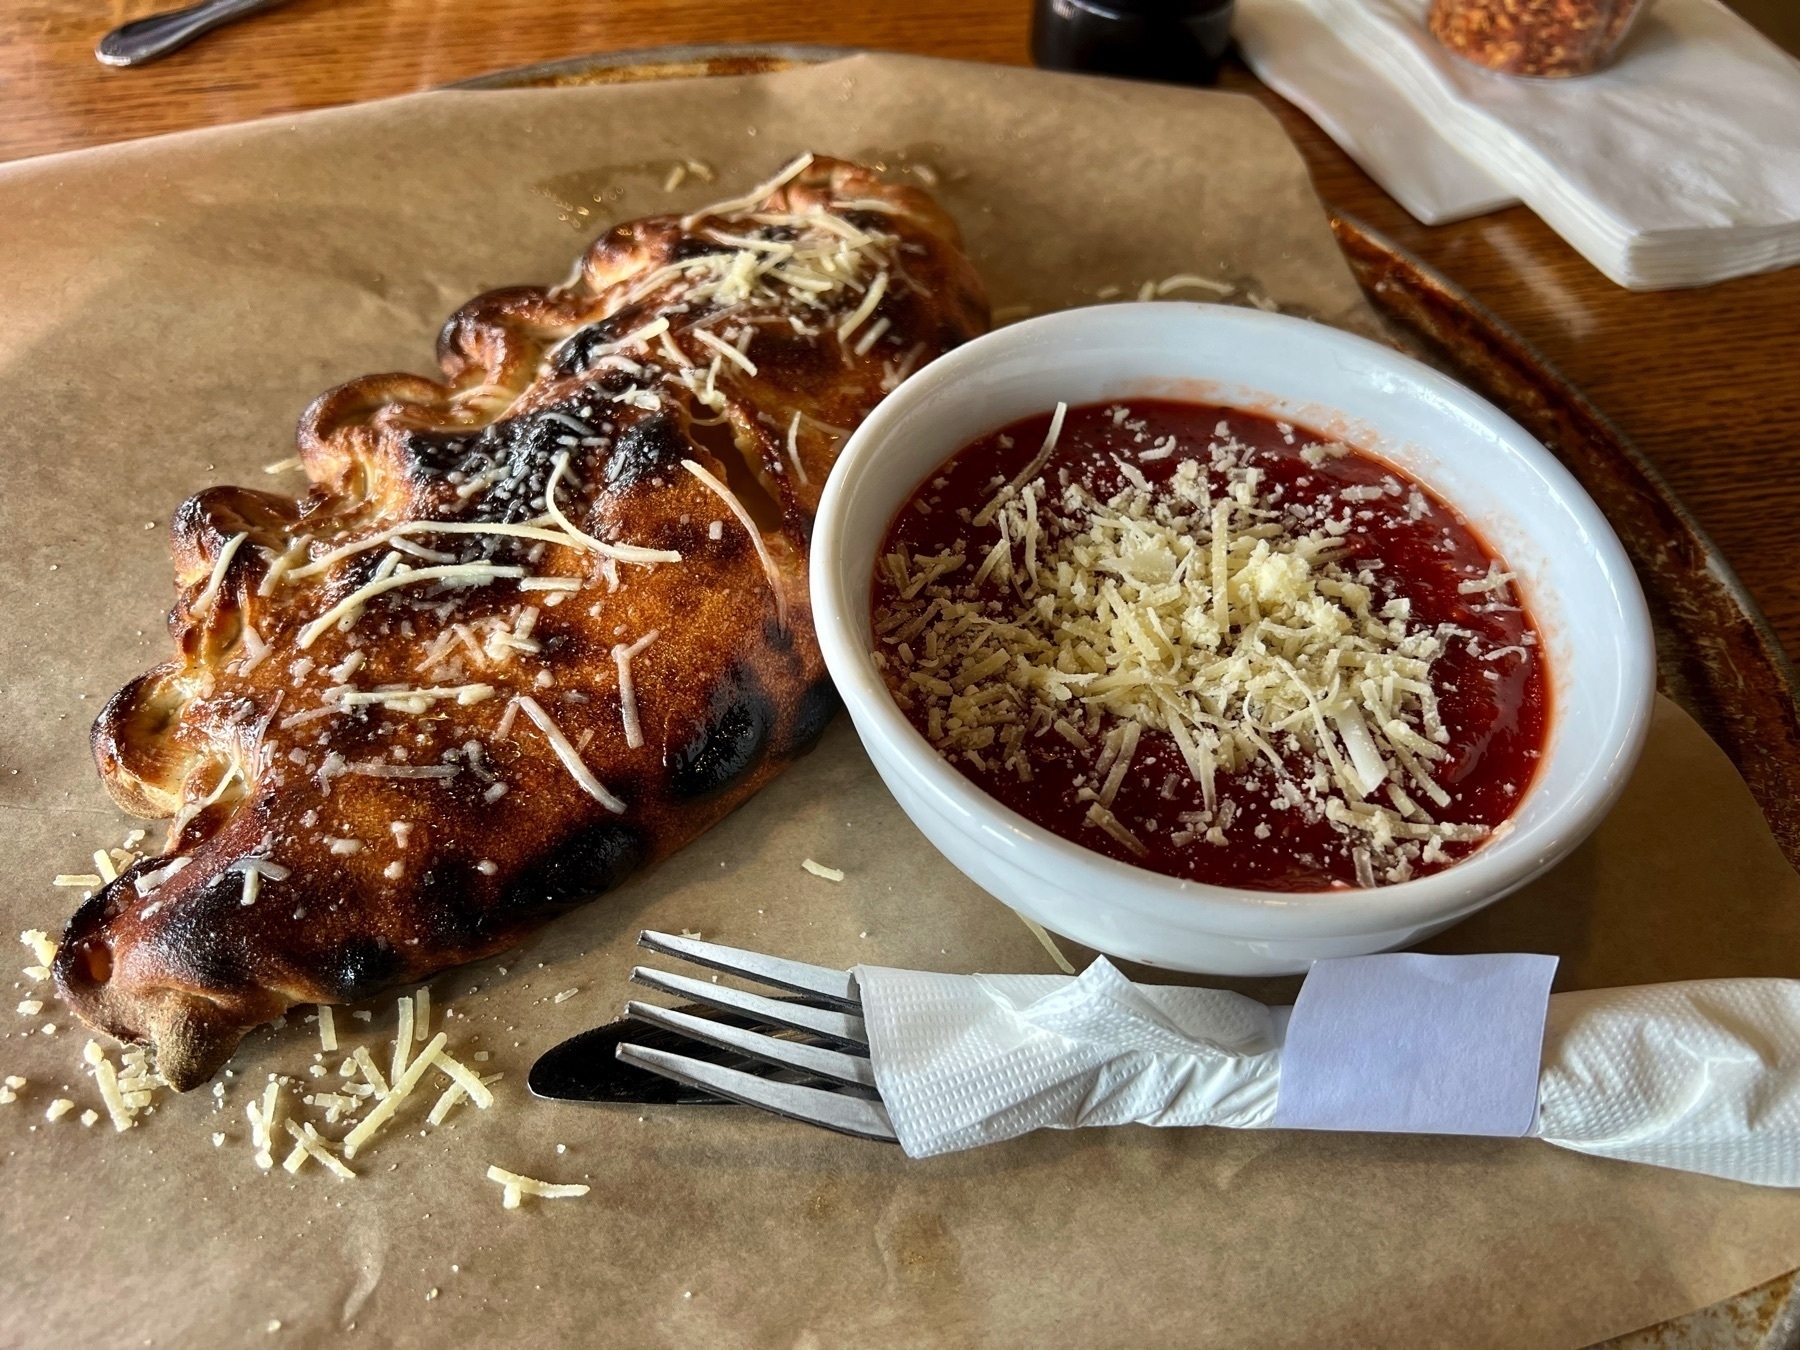 Delicious-looking calzone (in a crescent shape), with a little bit of cheese on top and brown from being baked in butter, next to a little bowl of marinara sauce with cheese in it.